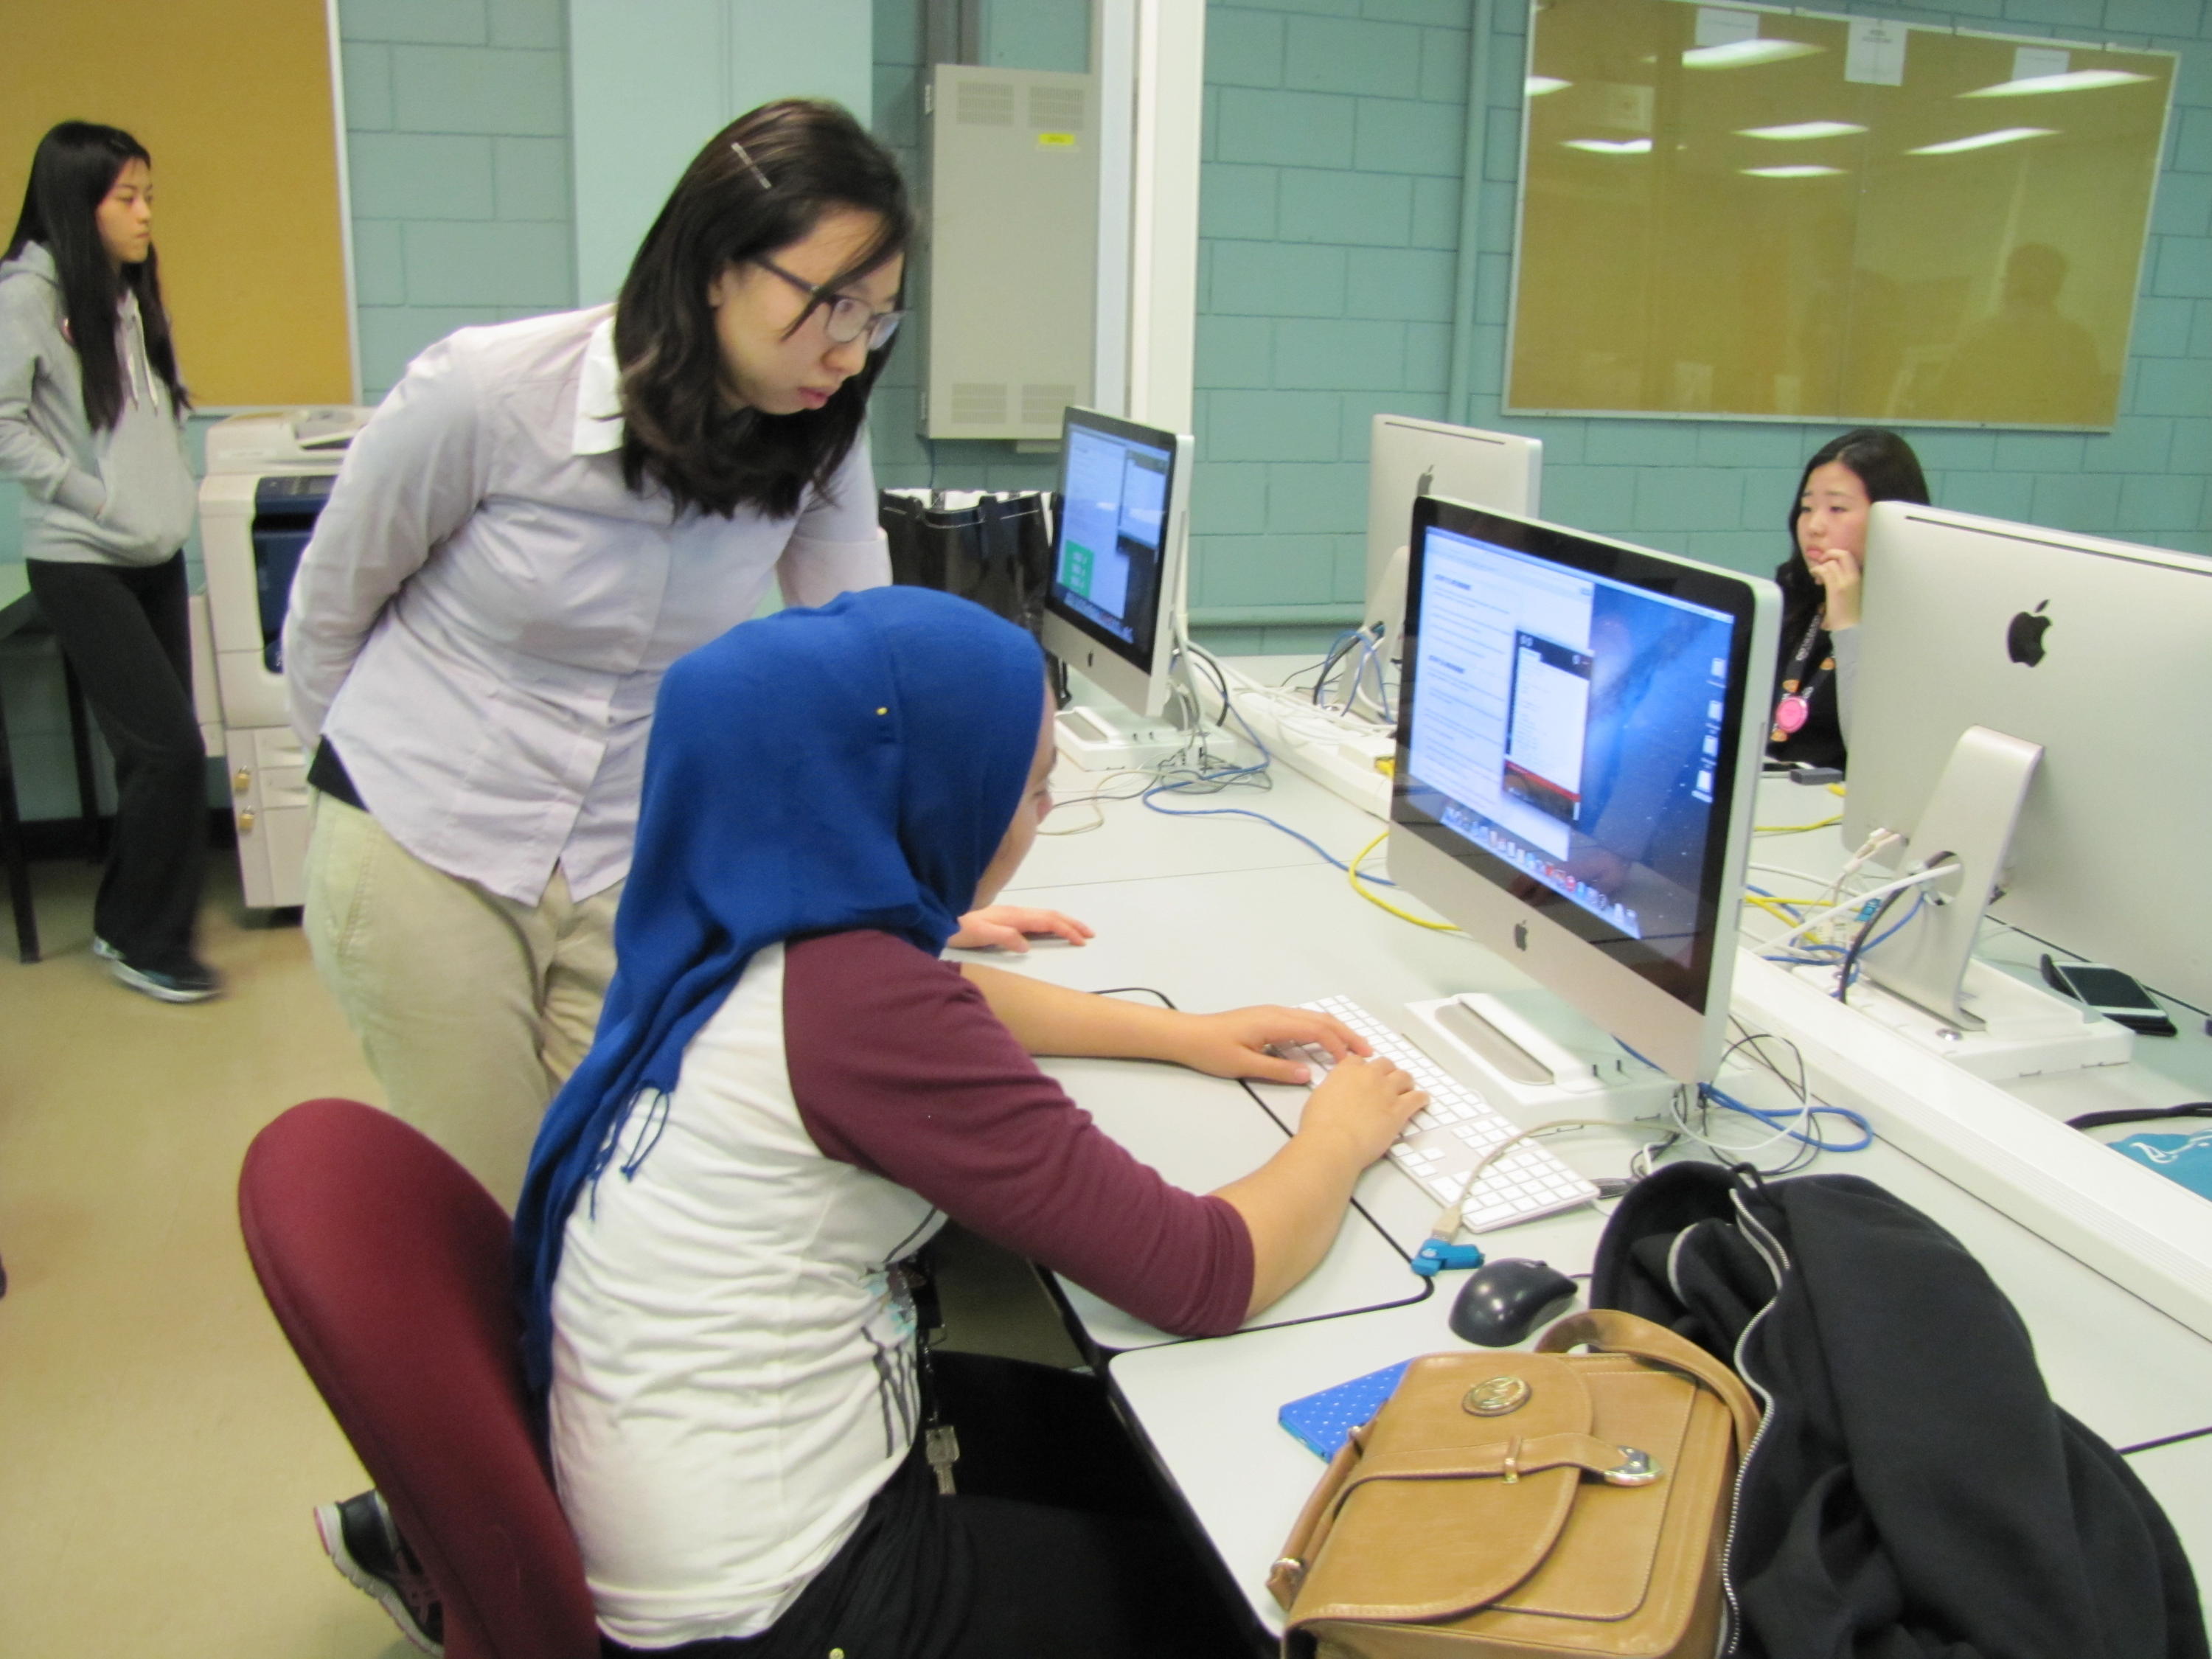 A teacher helps a student in a computer lab